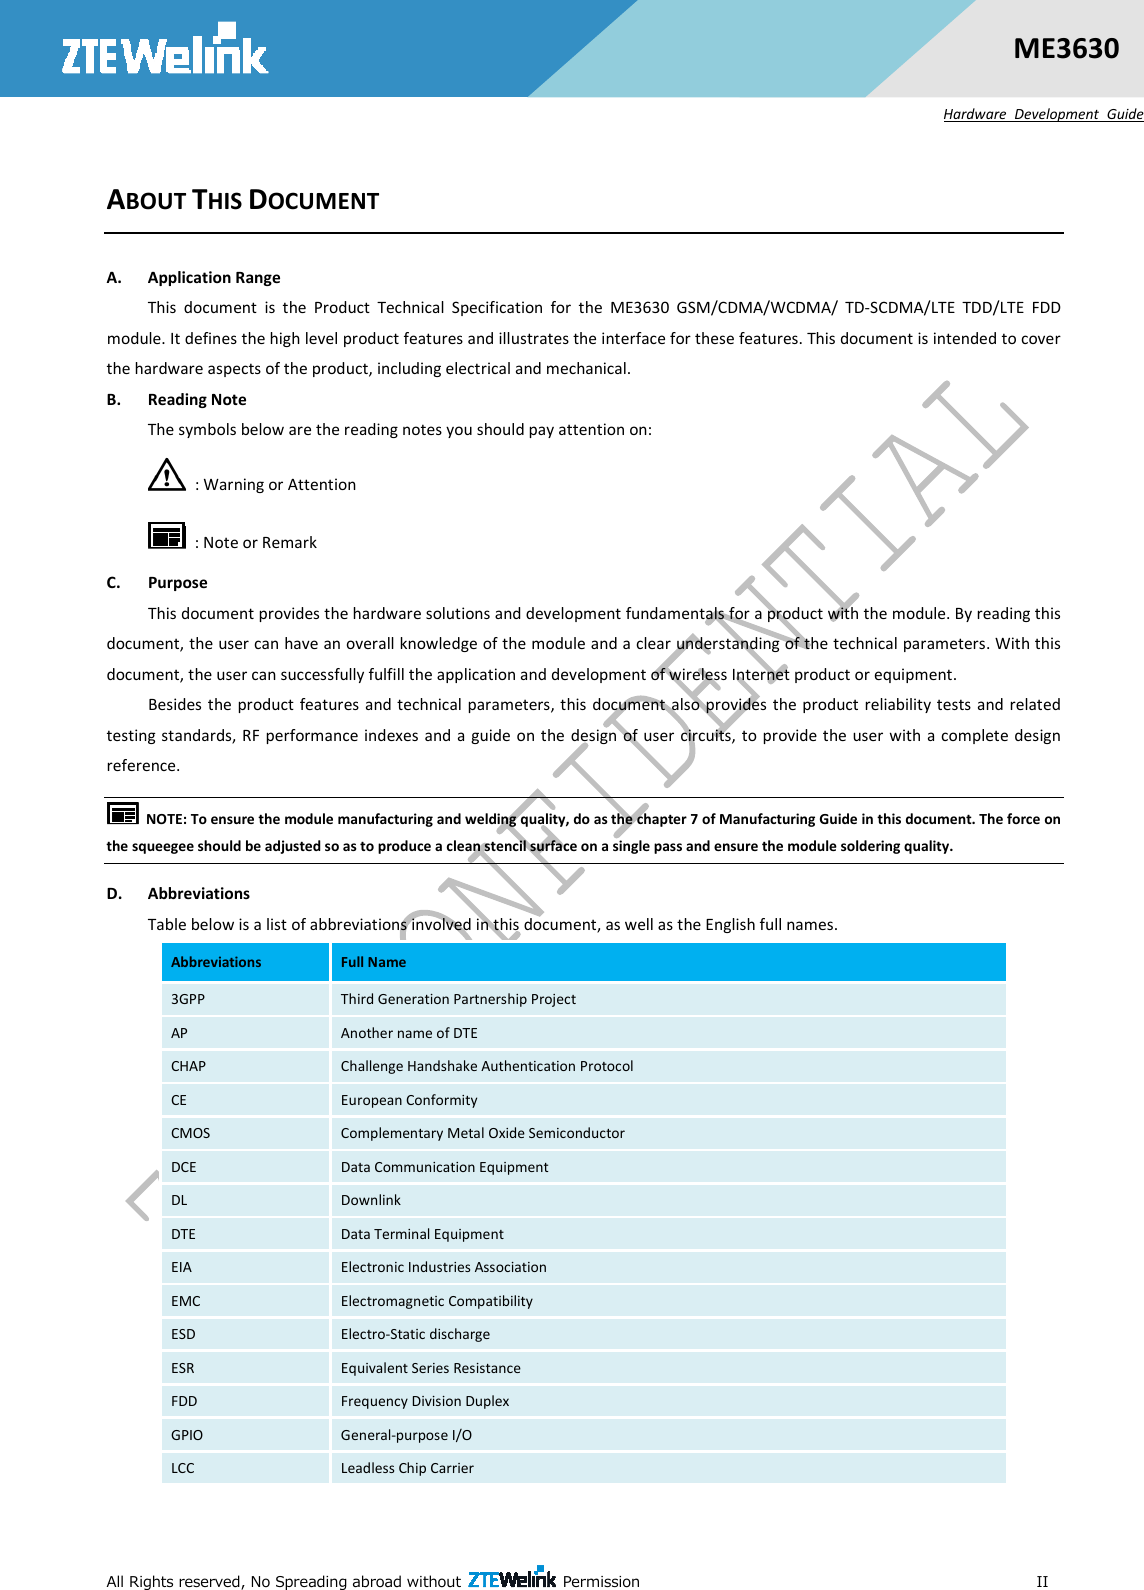  All Rights reserved, No Spreading abroad without    Permission                                                                                                           II ME3630 Hardware  Development  Guide ABOUT THIS DOCUMENT A. Application Range This  document  is  the  Product  Technical  Specification  for  the  ME3630  GSM/CDMA/WCDMA/  TD-SCDMA/LTE  TDD/LTE  FDD module. It defines the high level product features and illustrates the interface for these features. This document is intended to cover the hardware aspects of the product, including electrical and mechanical. B. Reading Note The symbols below are the reading notes you should pay attention on:   : Warning or Attention   : Note or Remark C. Purpose This document provides the hardware solutions and development fundamentals for a product with the module. By reading this document, the user can have an overall knowledge of the module and a clear understanding of the technical parameters. With this document, the user can successfully fulfill the application and development of wireless Internet product or equipment. Besides the product features and technical parameters, this document also provides the product reliability tests  and related testing standards, RF performance indexes and a guide on the design of user  circuits, to provide the user with  a  complete design reference.     NOTE: To ensure the module manufacturing and welding quality, do as the chapter 7 of Manufacturing Guide in this document. The force on the squeegee should be adjusted so as to produce a clean stencil surface on a single pass and ensure the module soldering quality. D. Abbreviations Table below is a list of abbreviations involved in this document, as well as the English full names. Abbreviations  Full Name 3GPP  Third Generation Partnership Project AP  Another name of DTE CHAP  Challenge Handshake Authentication Protocol CE  European Conformity CMOS  Complementary Metal Oxide Semiconductor DCE  Data Communication Equipment DL  Downlink DTE  Data Terminal Equipment EIA  Electronic Industries Association EMC  Electromagnetic Compatibility ESD  Electro-Static discharge ESR  Equivalent Series Resistance FDD  Frequency Division Duplex GPIO  General-purpose I/O LCC  Leadless Chip Carrier 